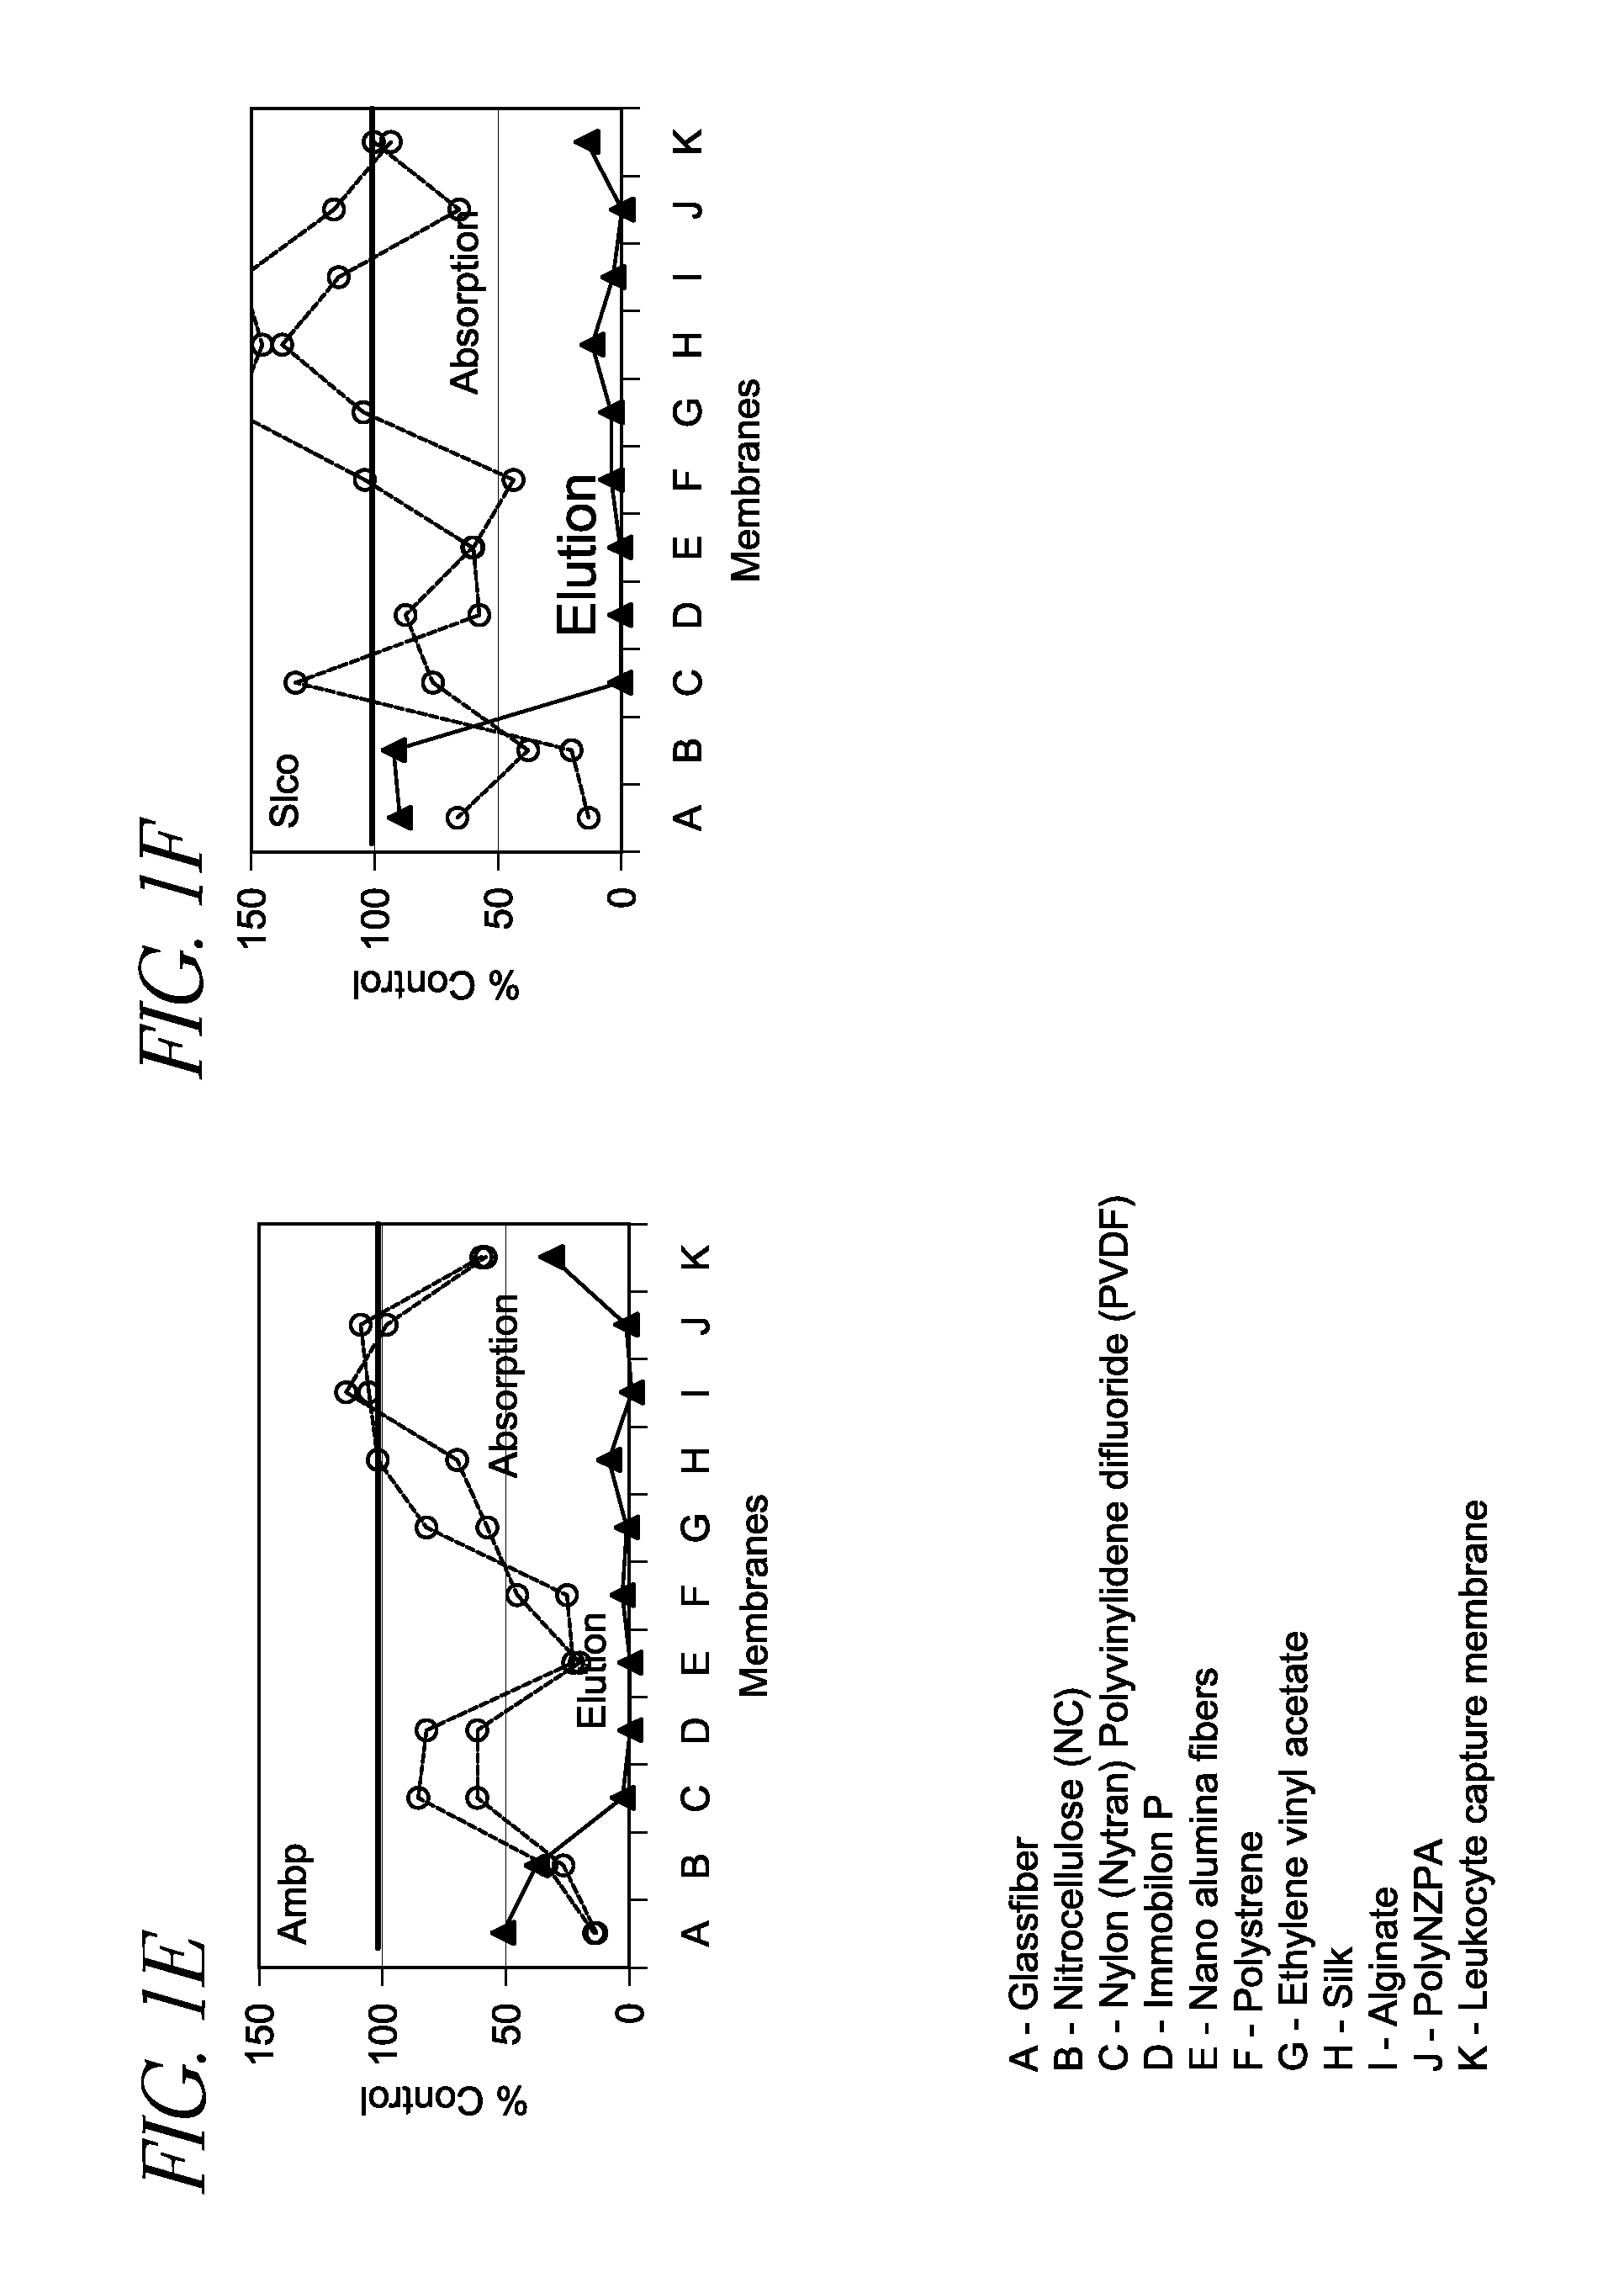 Methods for isolation of biomarkers from vesicles